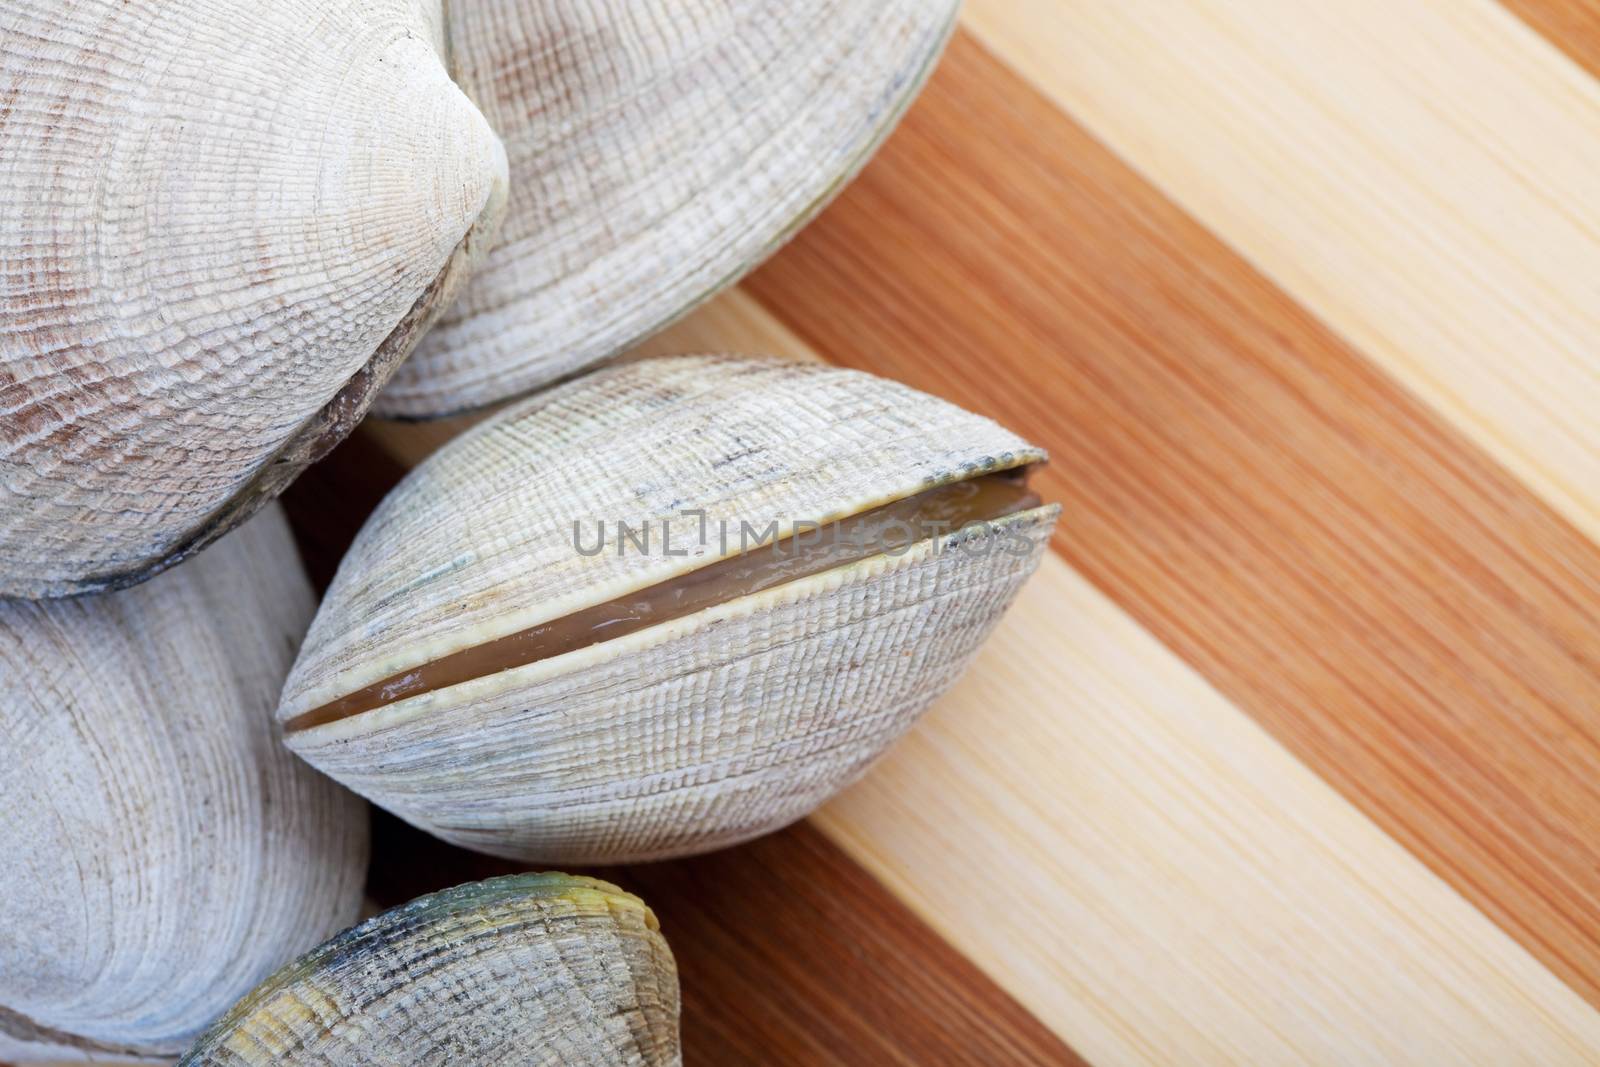 Live clams on a cutting board, ready to cook.  Focus on opening clam.  Shallow dof.